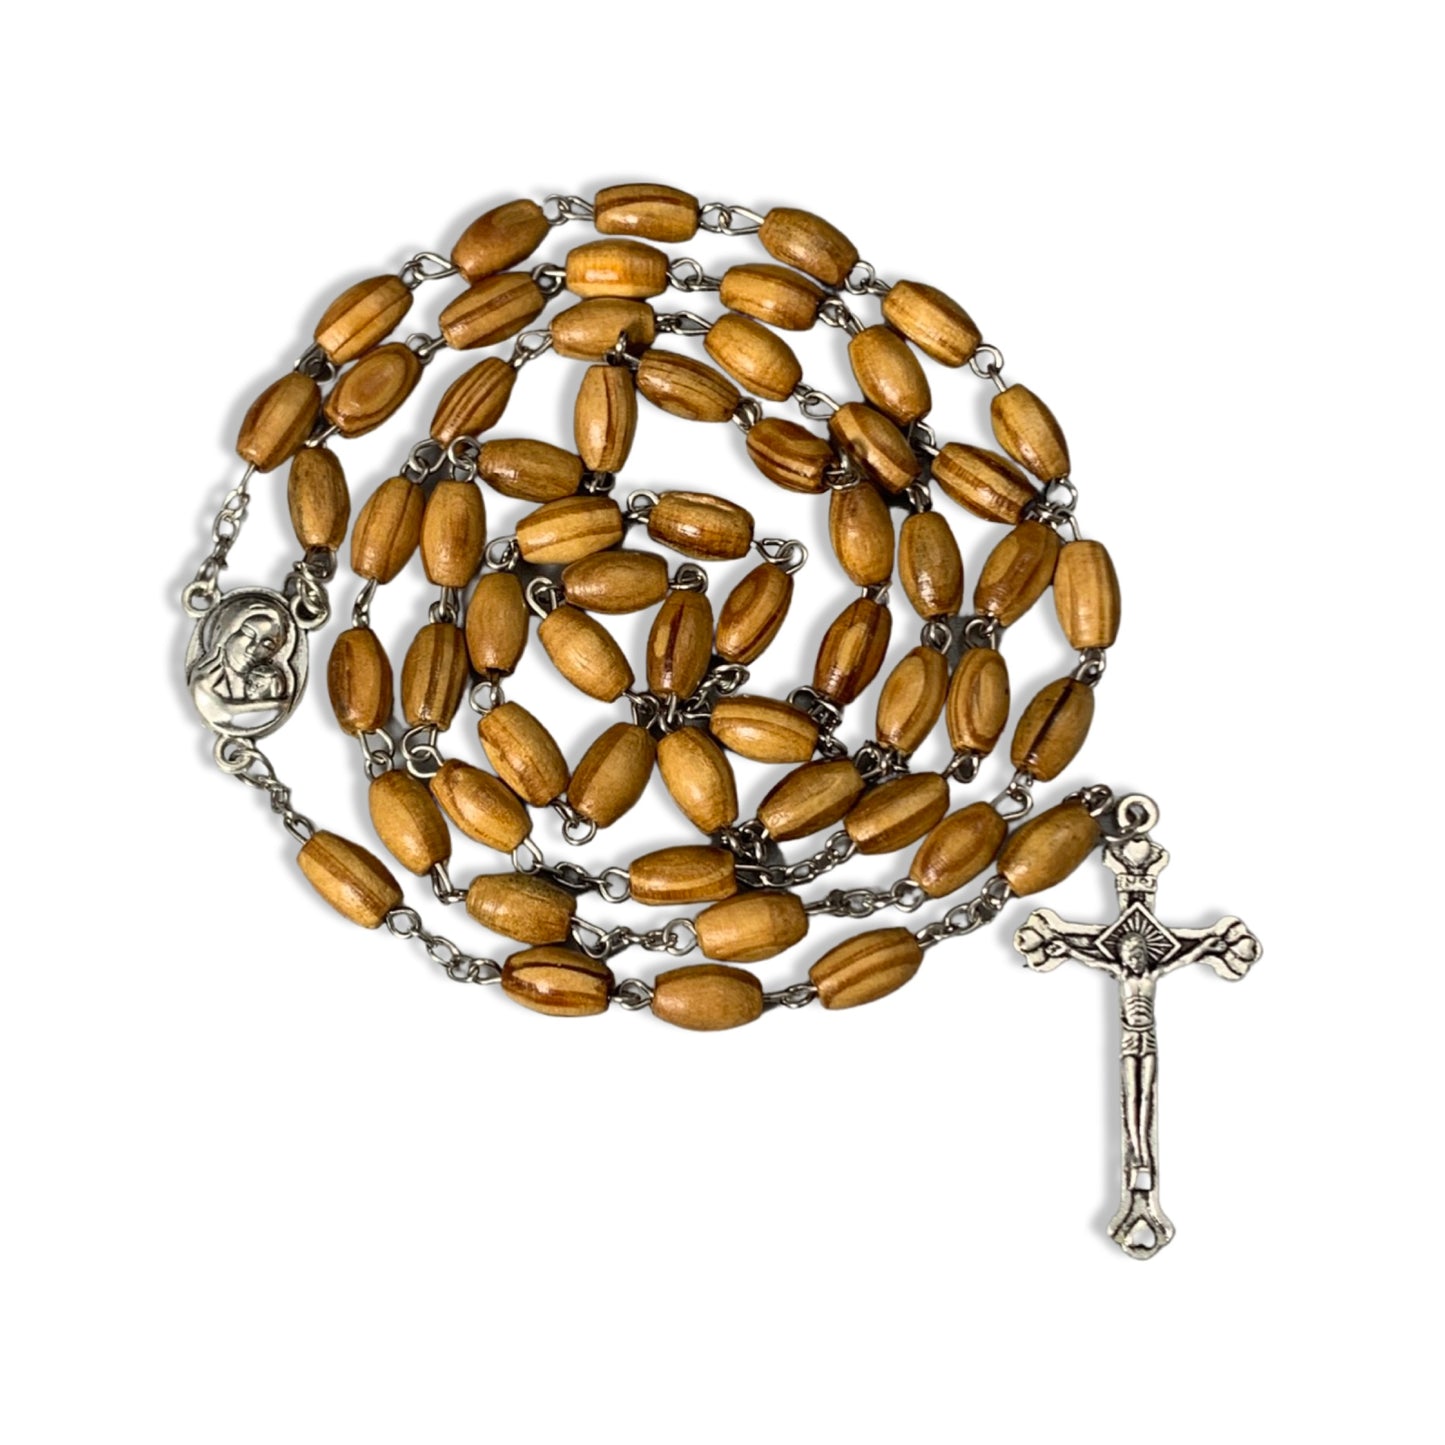 Olive Wood Our Lady of Tenderness Rosary with Soil